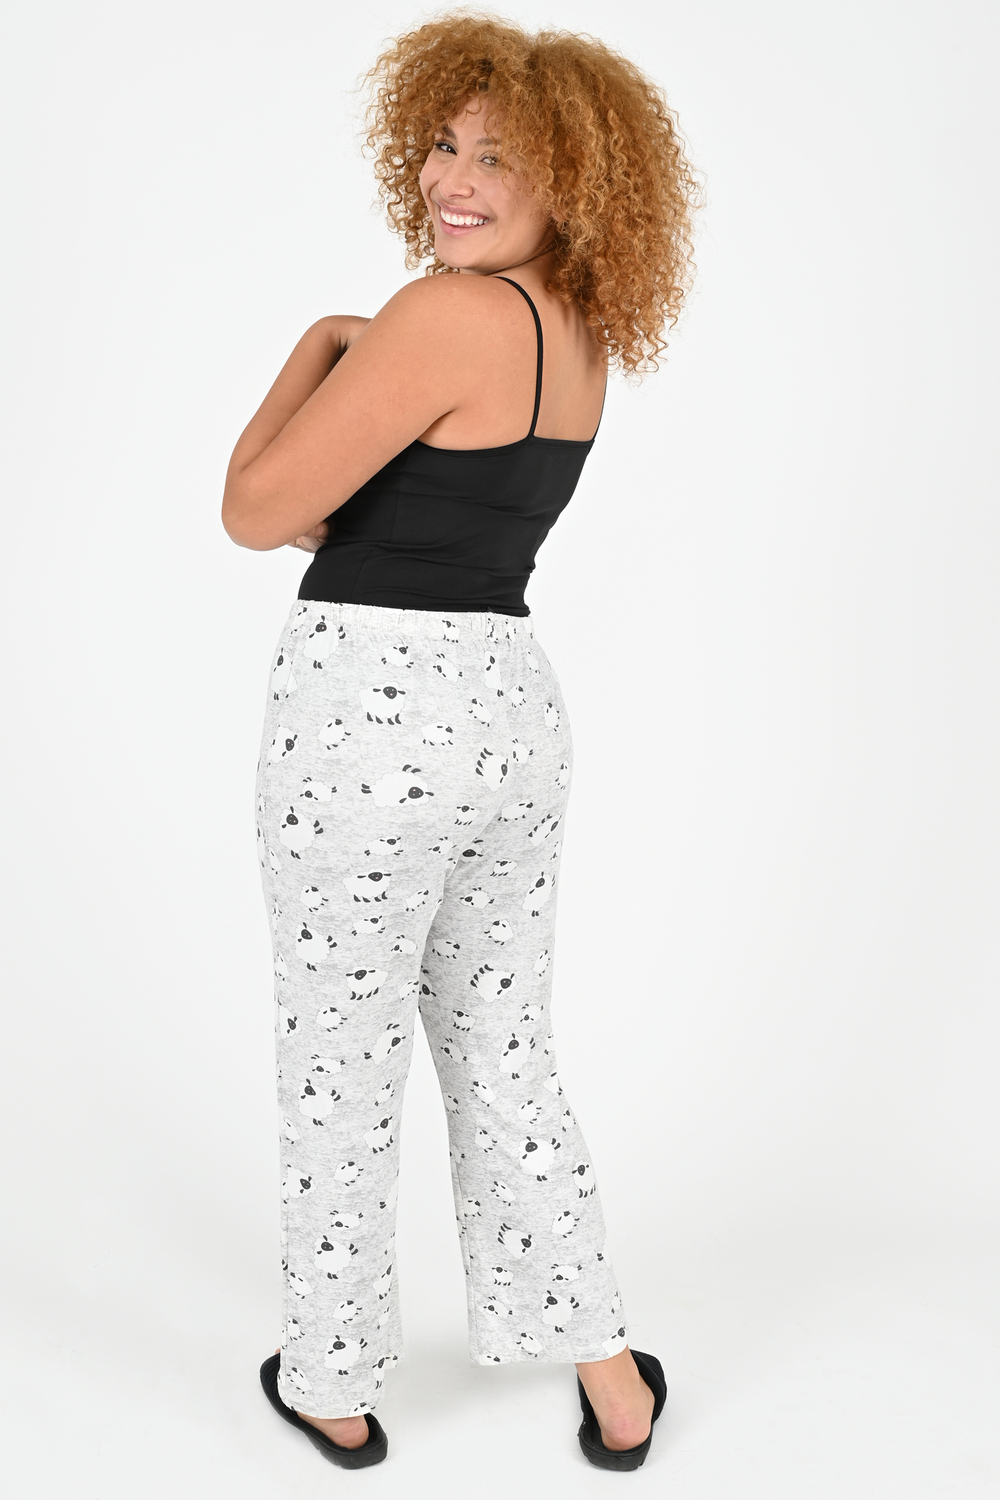 Charmour - Silky touch PJ pants - Bouncing sheep - Plus Size